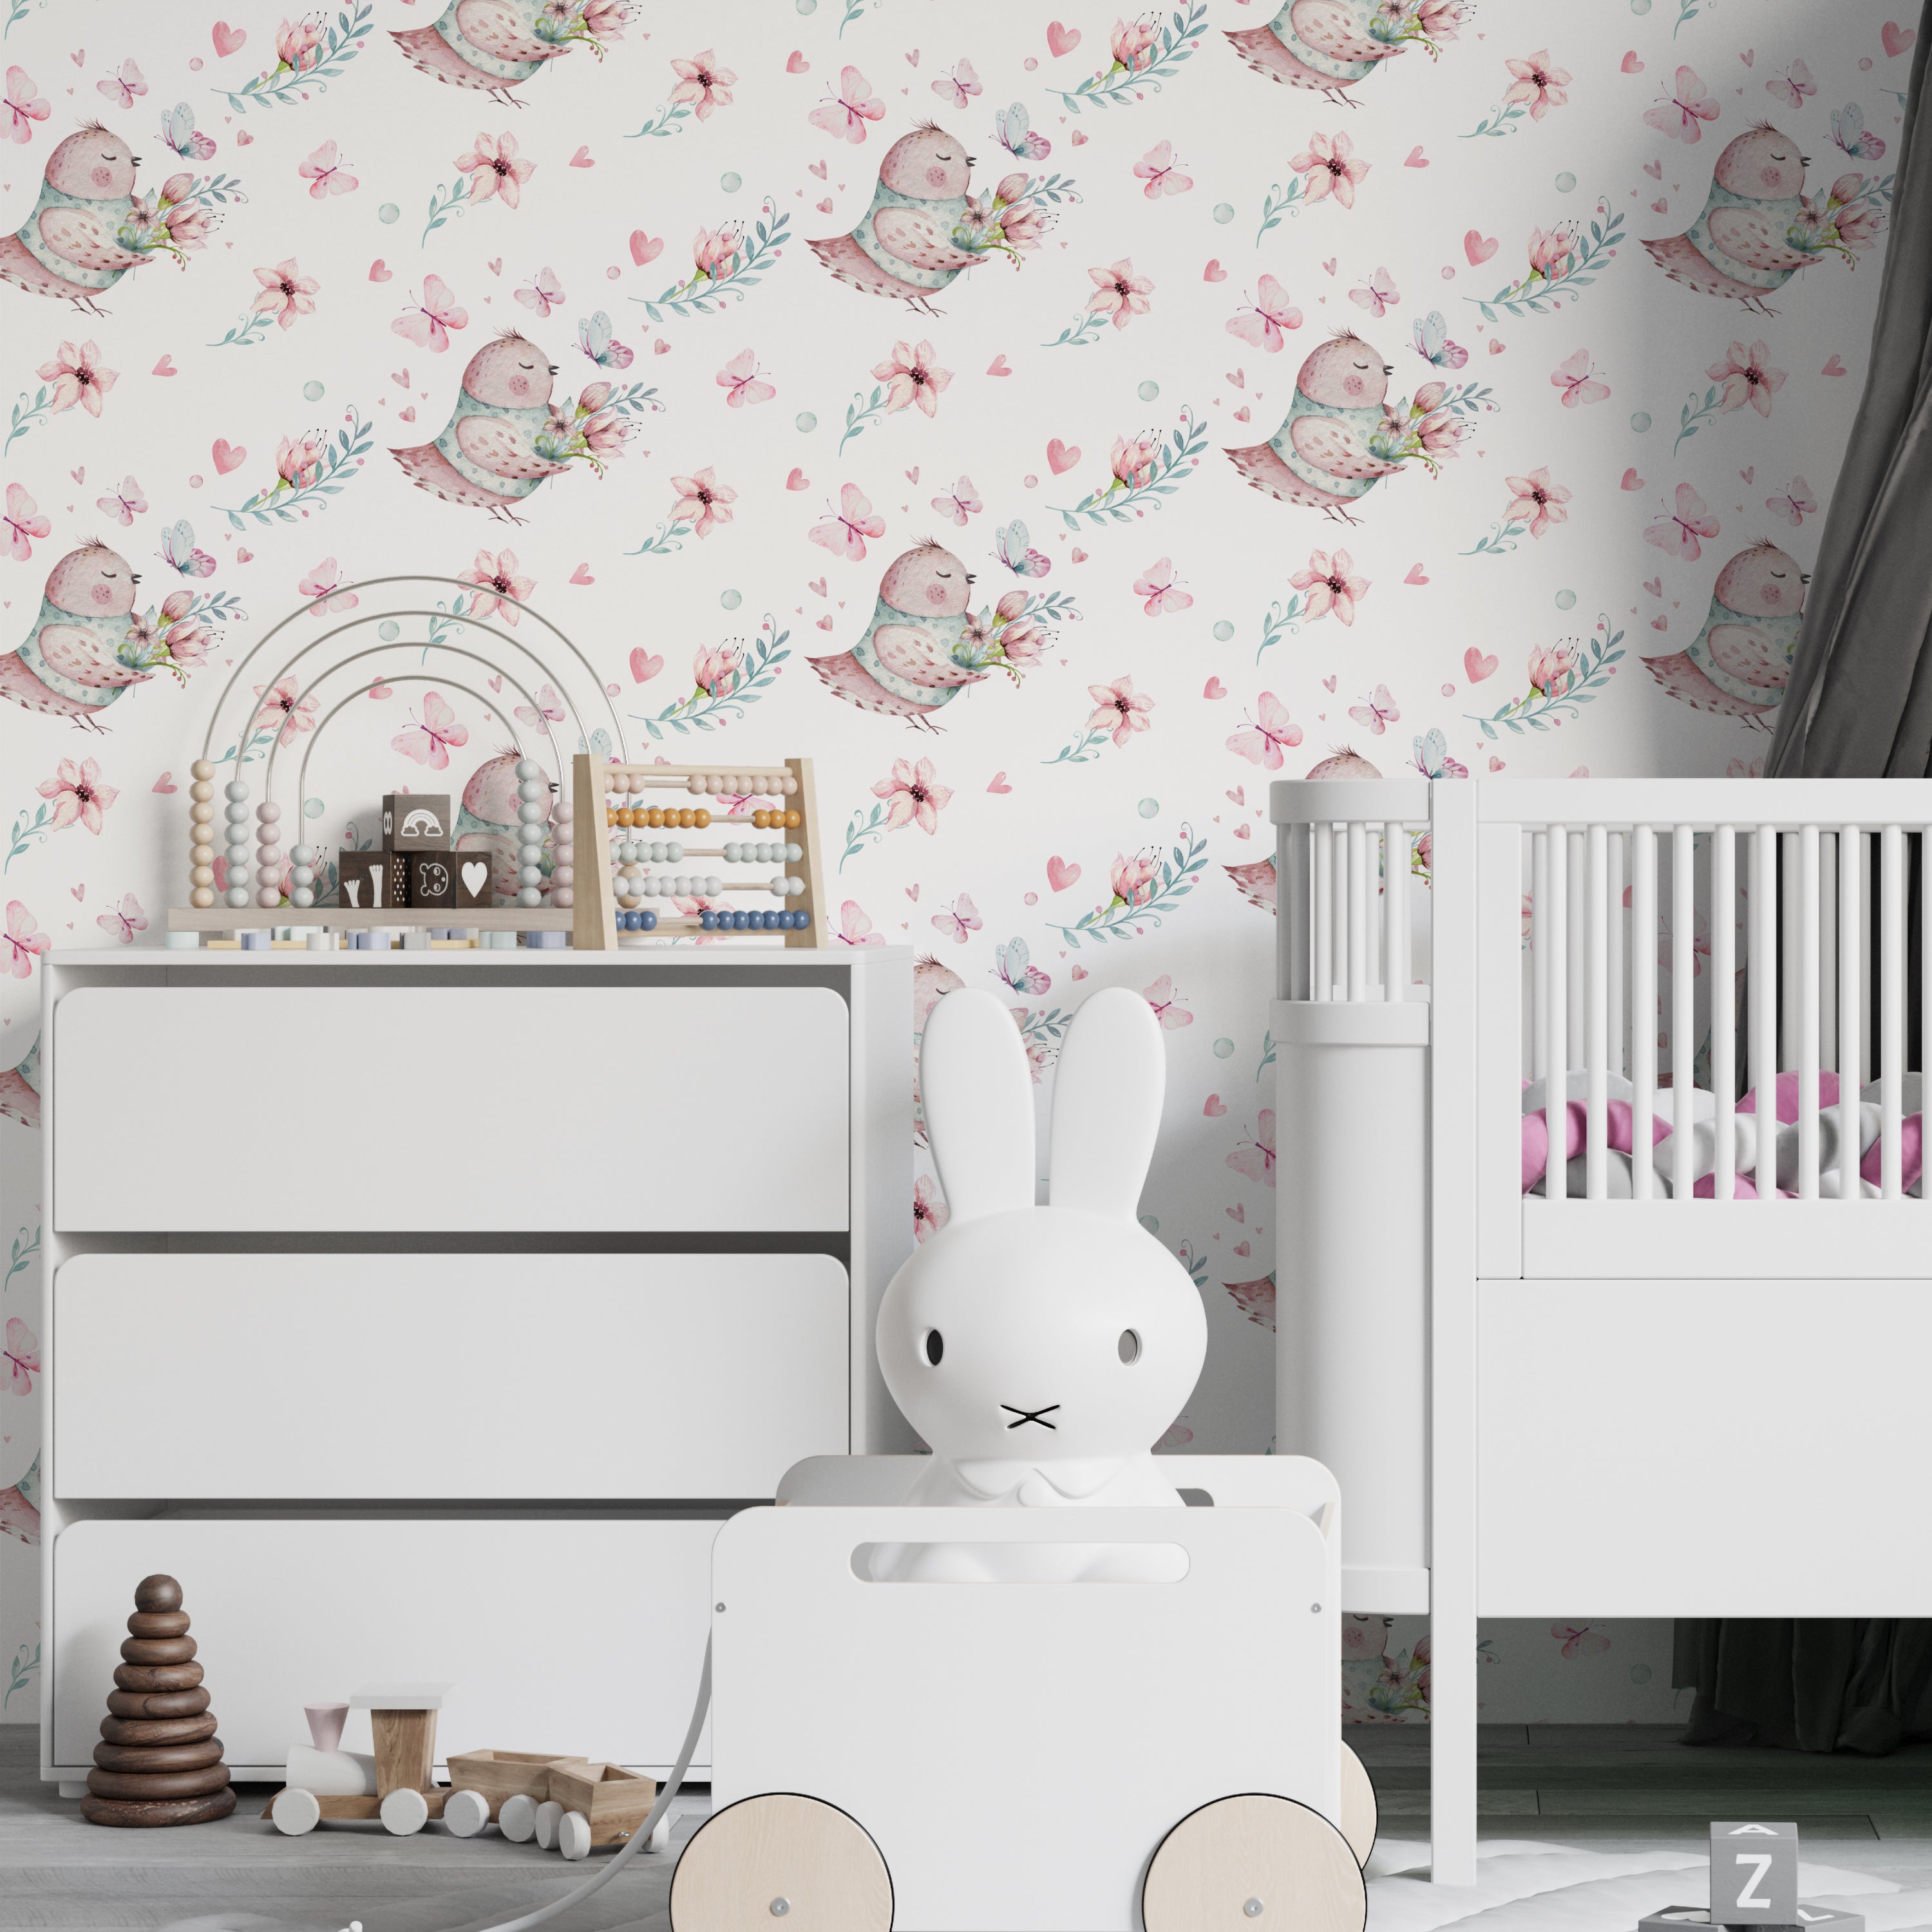 A children's nursery featuring walls covered with 'Fairy and Flowers Wallpaper IV'. The wallpaper displays a playful pattern of birds with leafy wings, scattered flowers, and butterflies, creating a magical and serene atmosphere. The room includes modern white furniture and playful children's toys